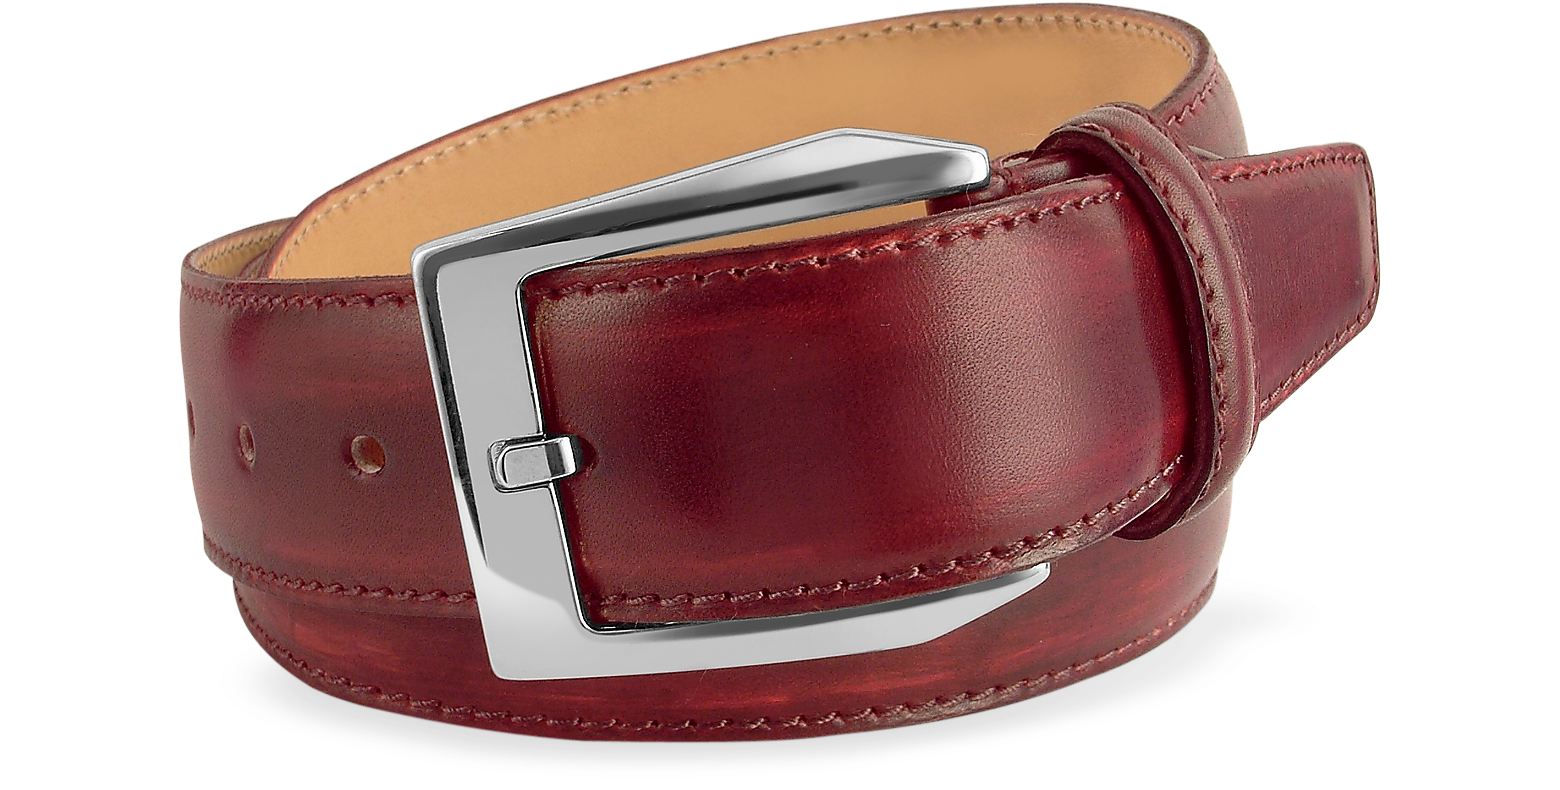 Pakerson Men's Wine Red Hand Painted Italian Leather Belt cm 105 - 120